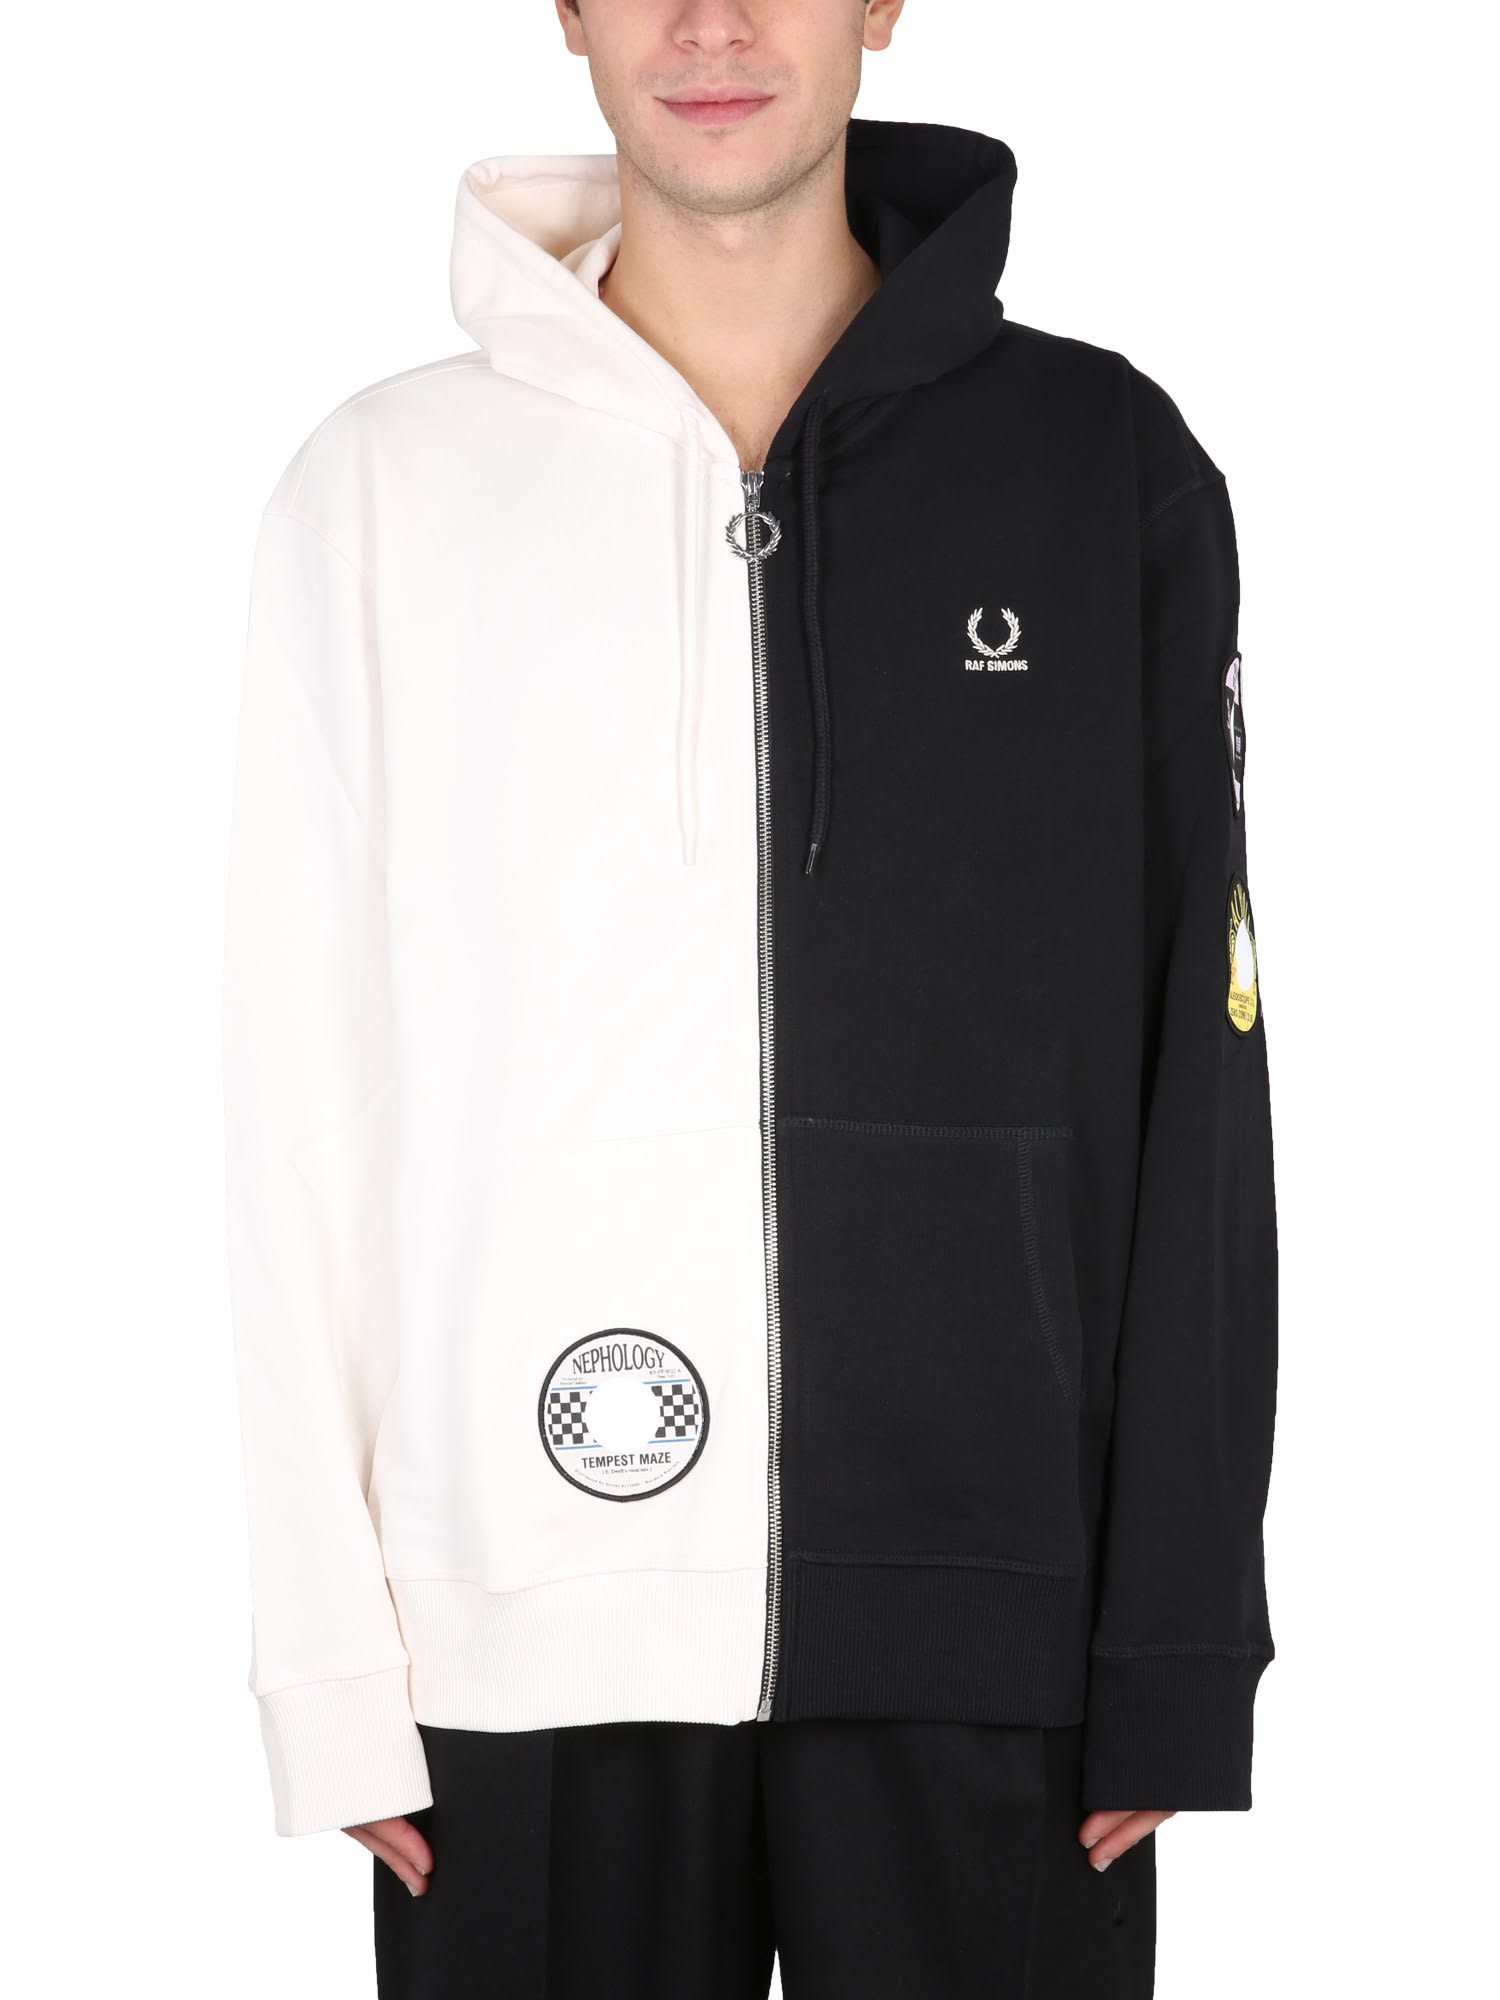 Fred Perry by Raf Simons Two-tone Hoodie